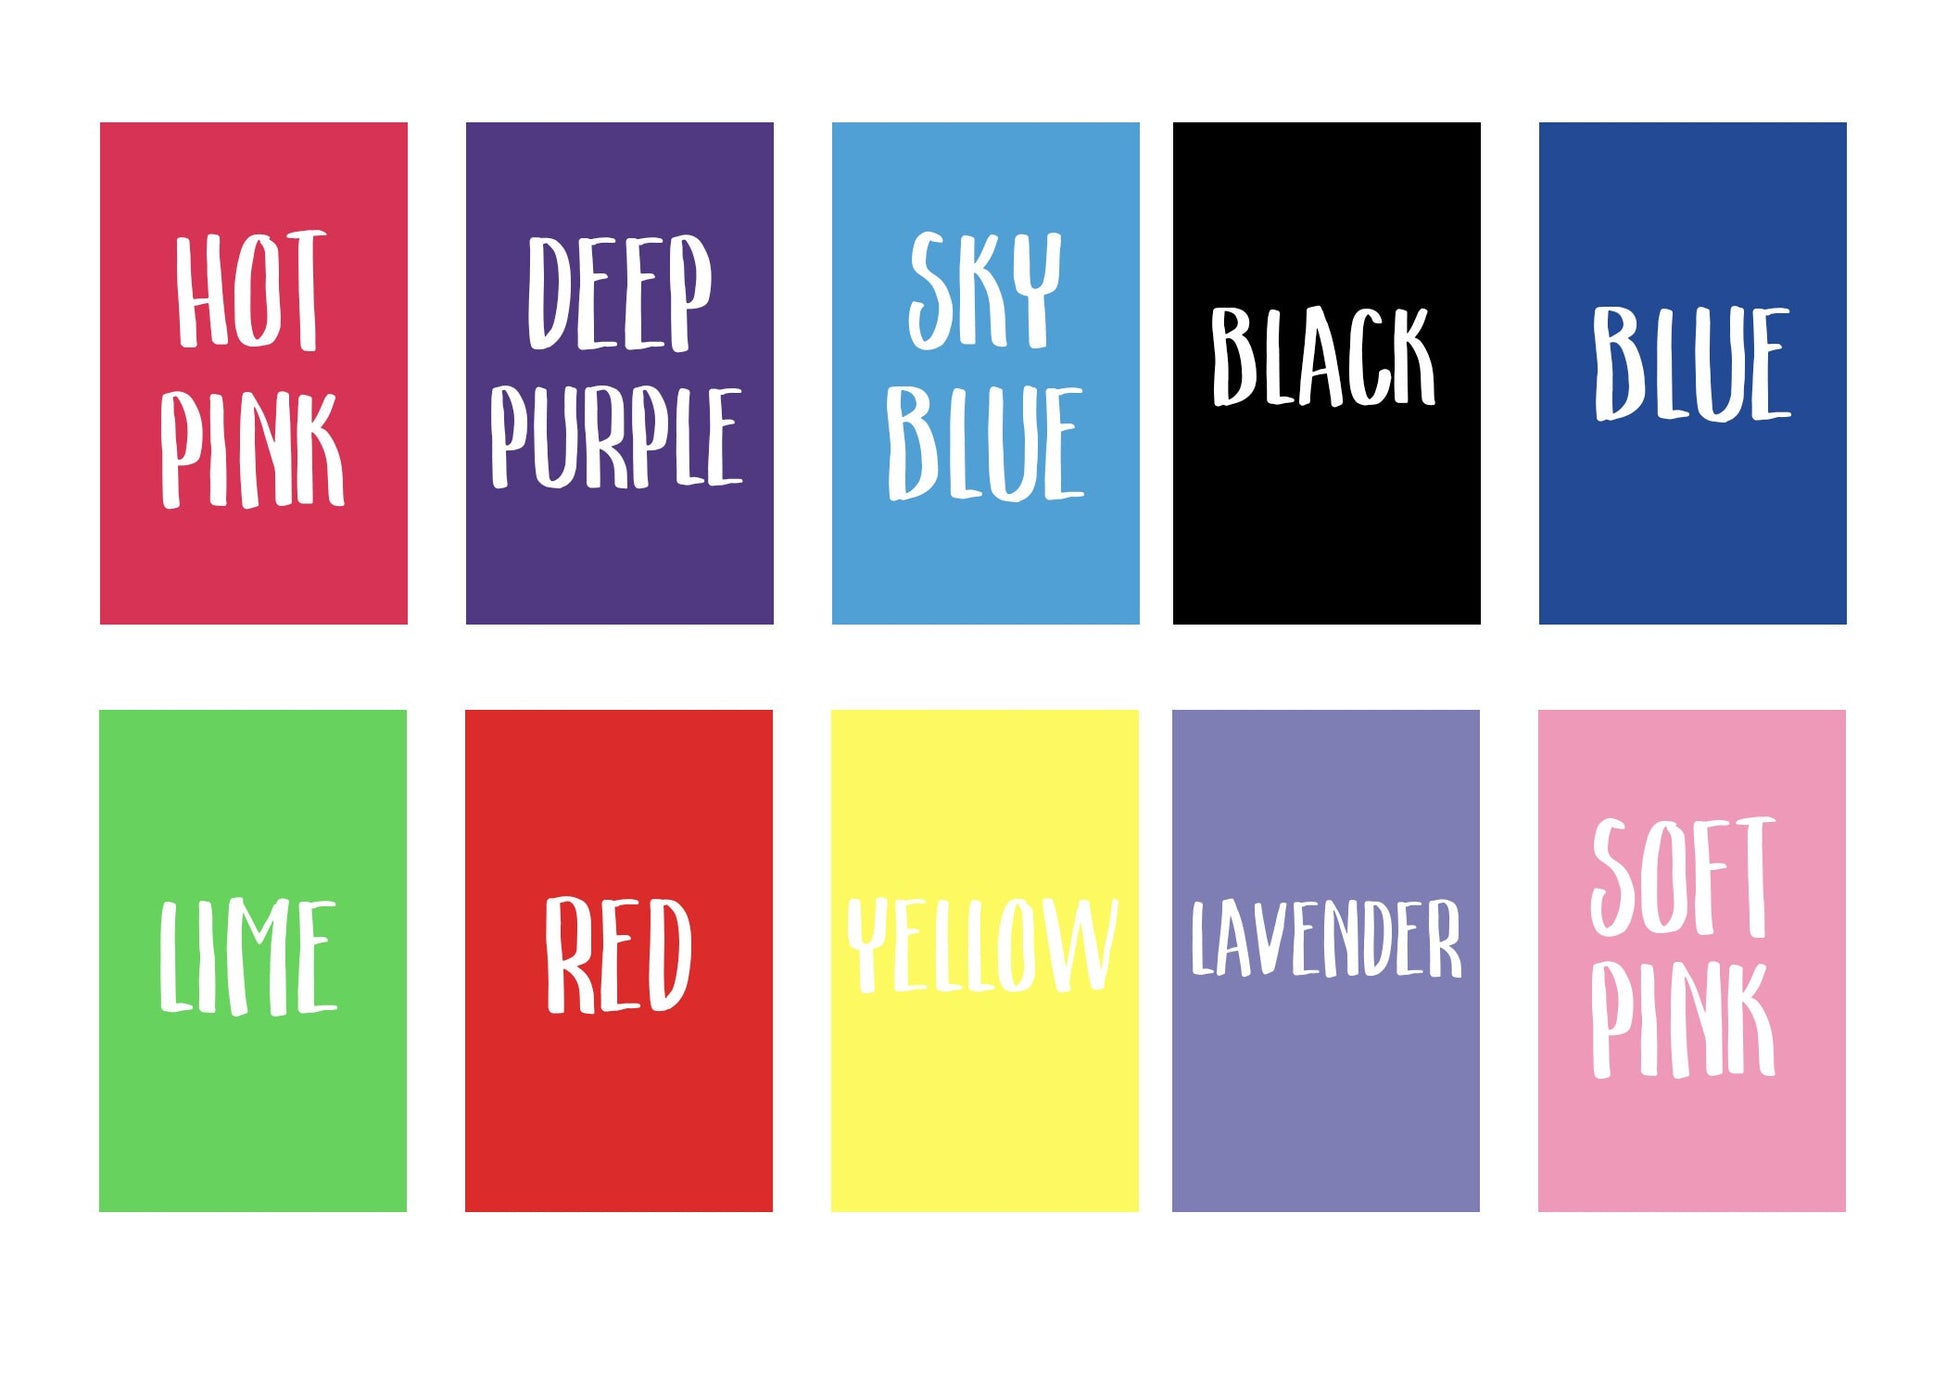 Color list for left to right: Hot pink, Deep Purple, Sky Blue, Black, Blue, Lime, Red, Yellow, Lavender, Soft pink